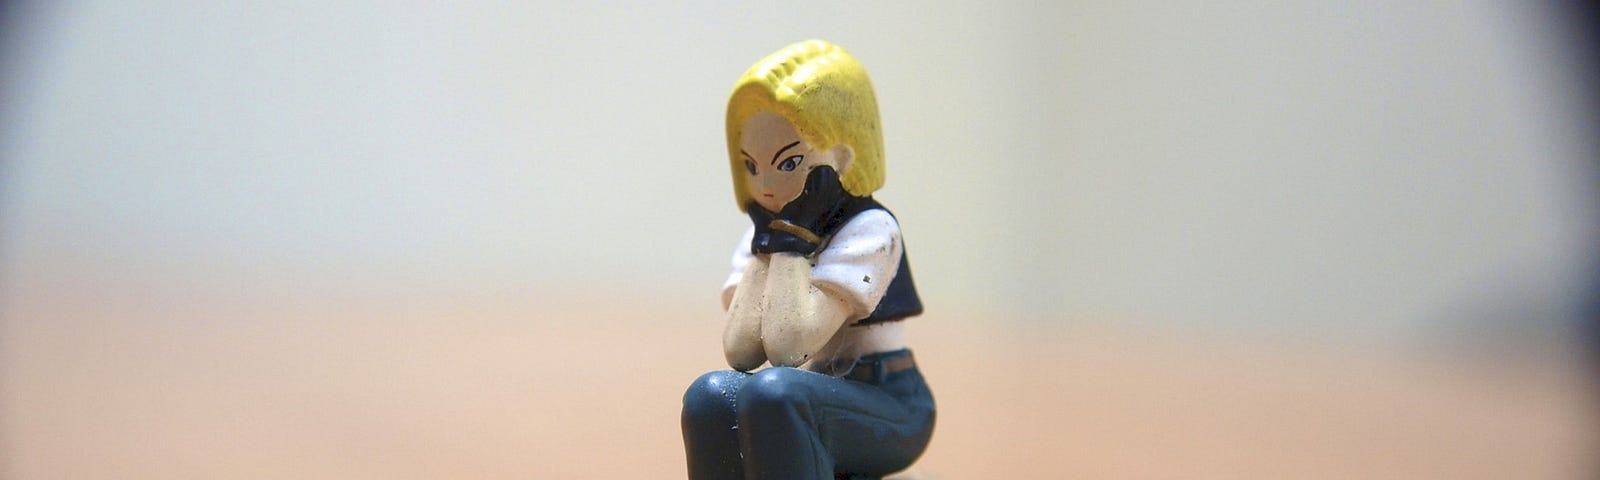 Figurine with blonde hair sits on a rock holding her head in her hands. The background is blurred.